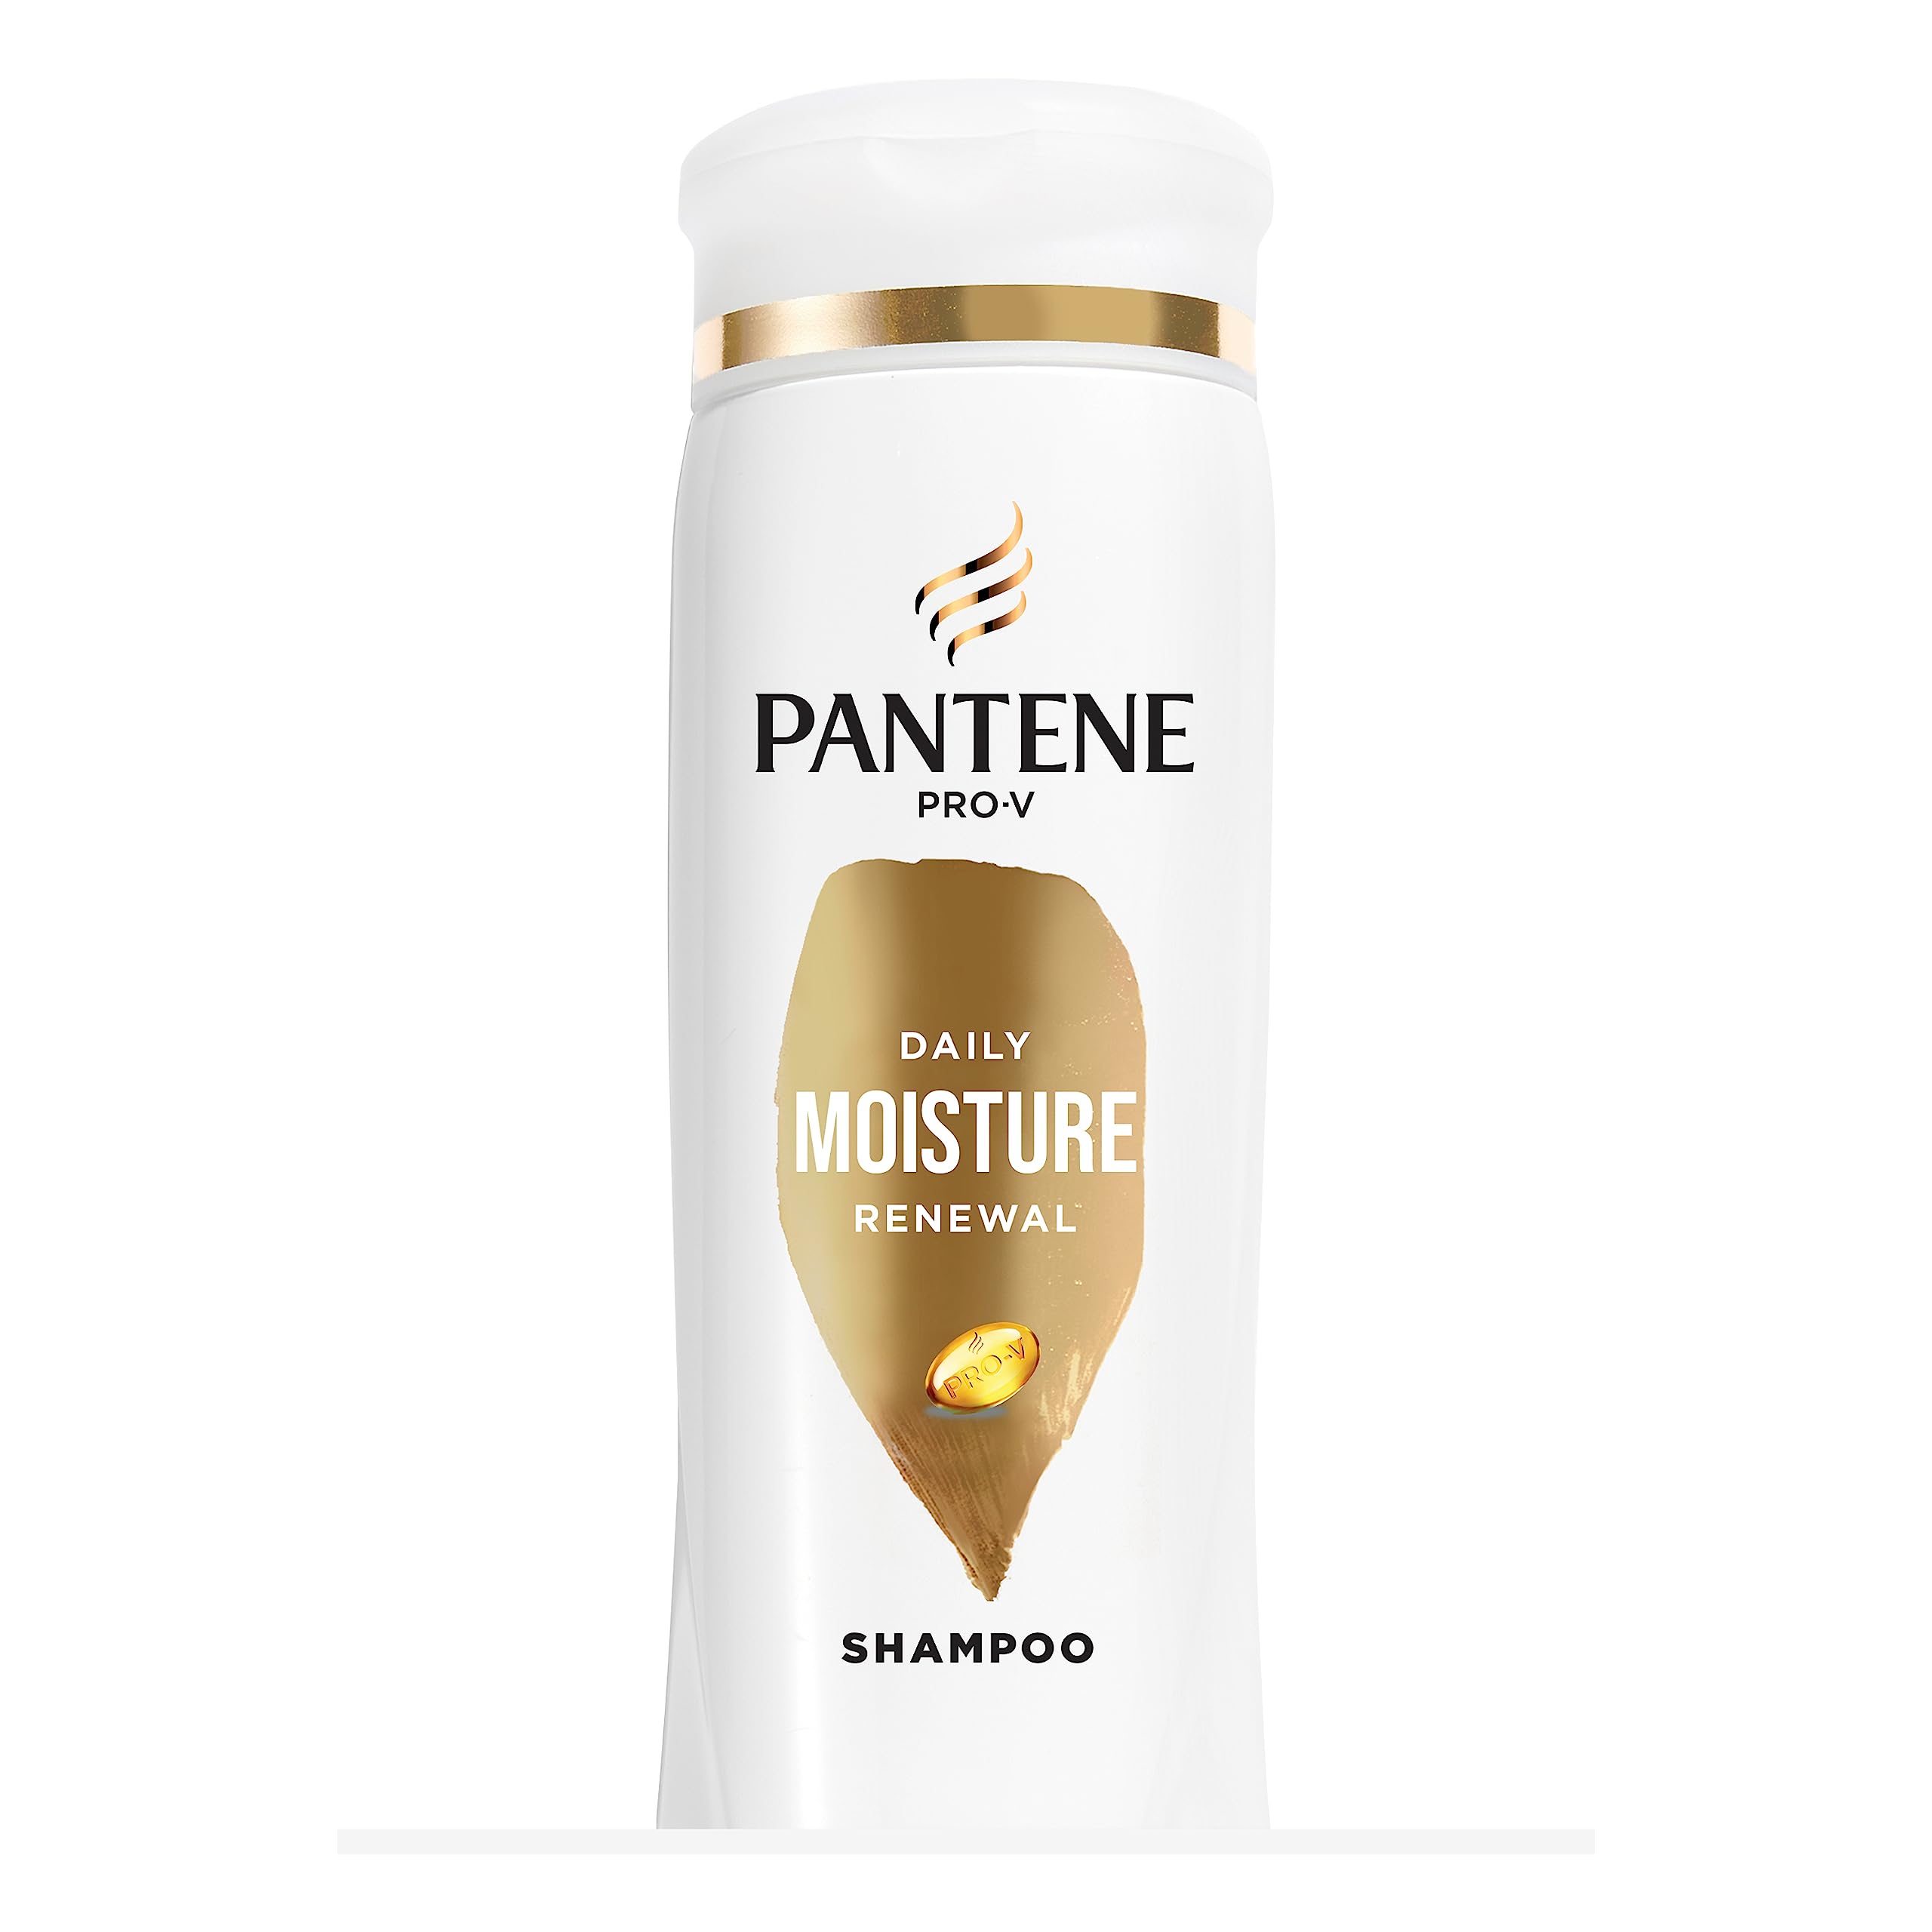 Pantene Shampoo for Dry Hair, Daily Moisture Renewal, Safe for Color-Treated Hair, 355 mL